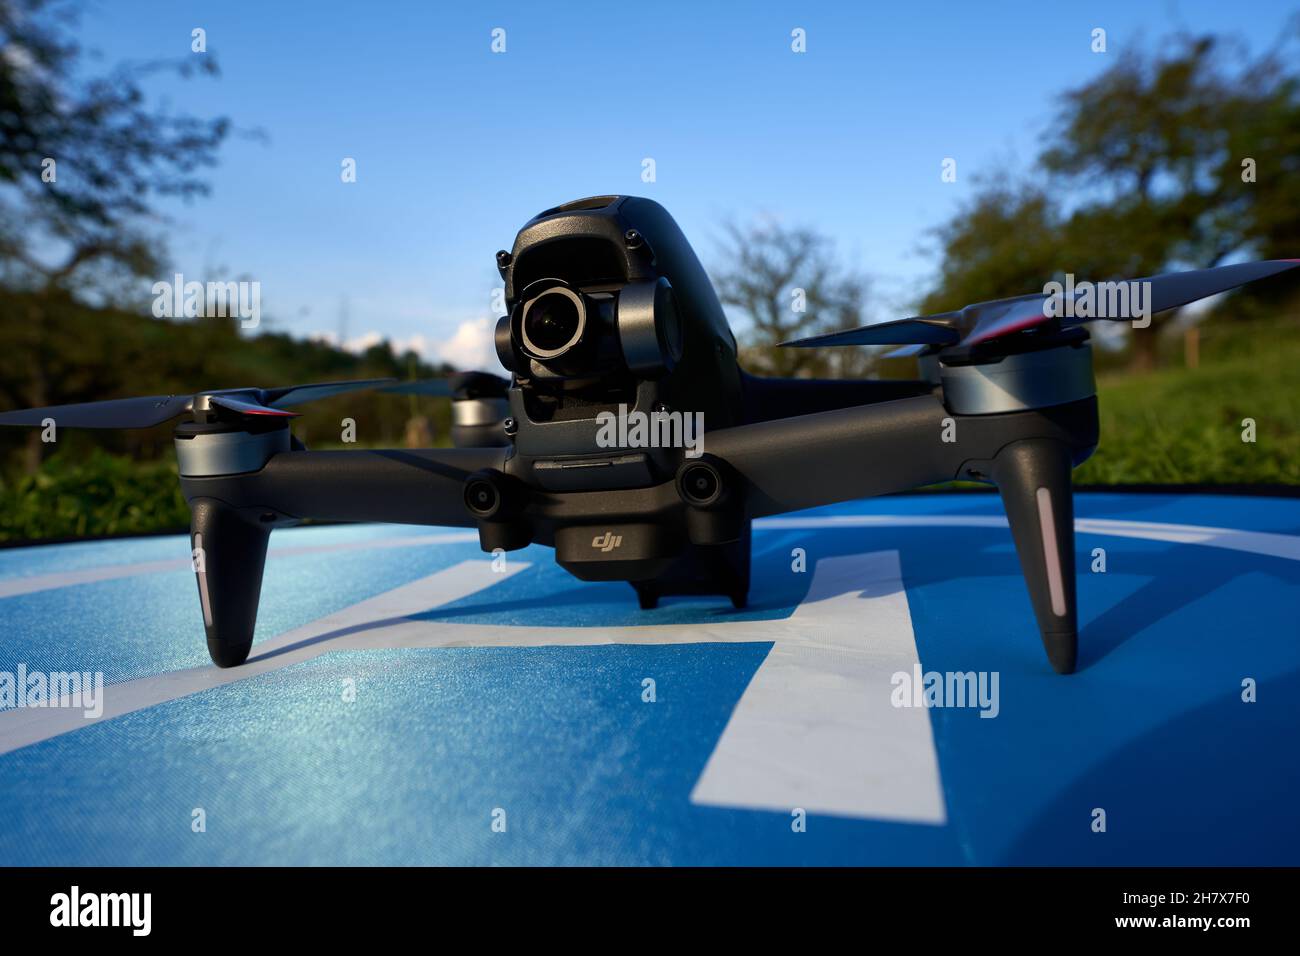 Nürtingen, Germany - June 26, 2021: Dji fpv drone on a blue launch pad. Trees and meadow in the background. Front view. Stock Photo